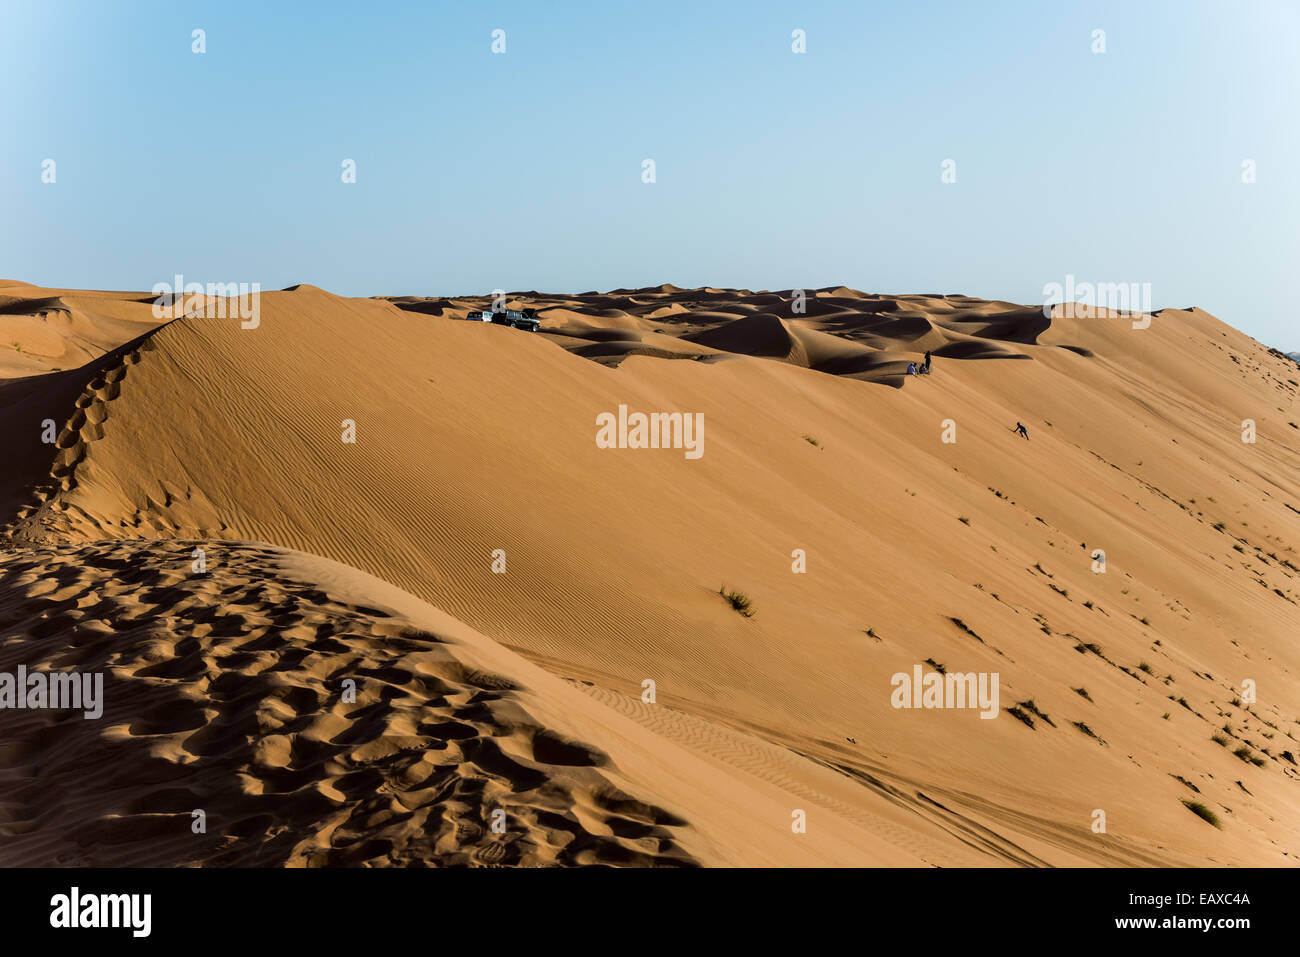 A sea of sand dunes in the desert of Oman. Stock Photo